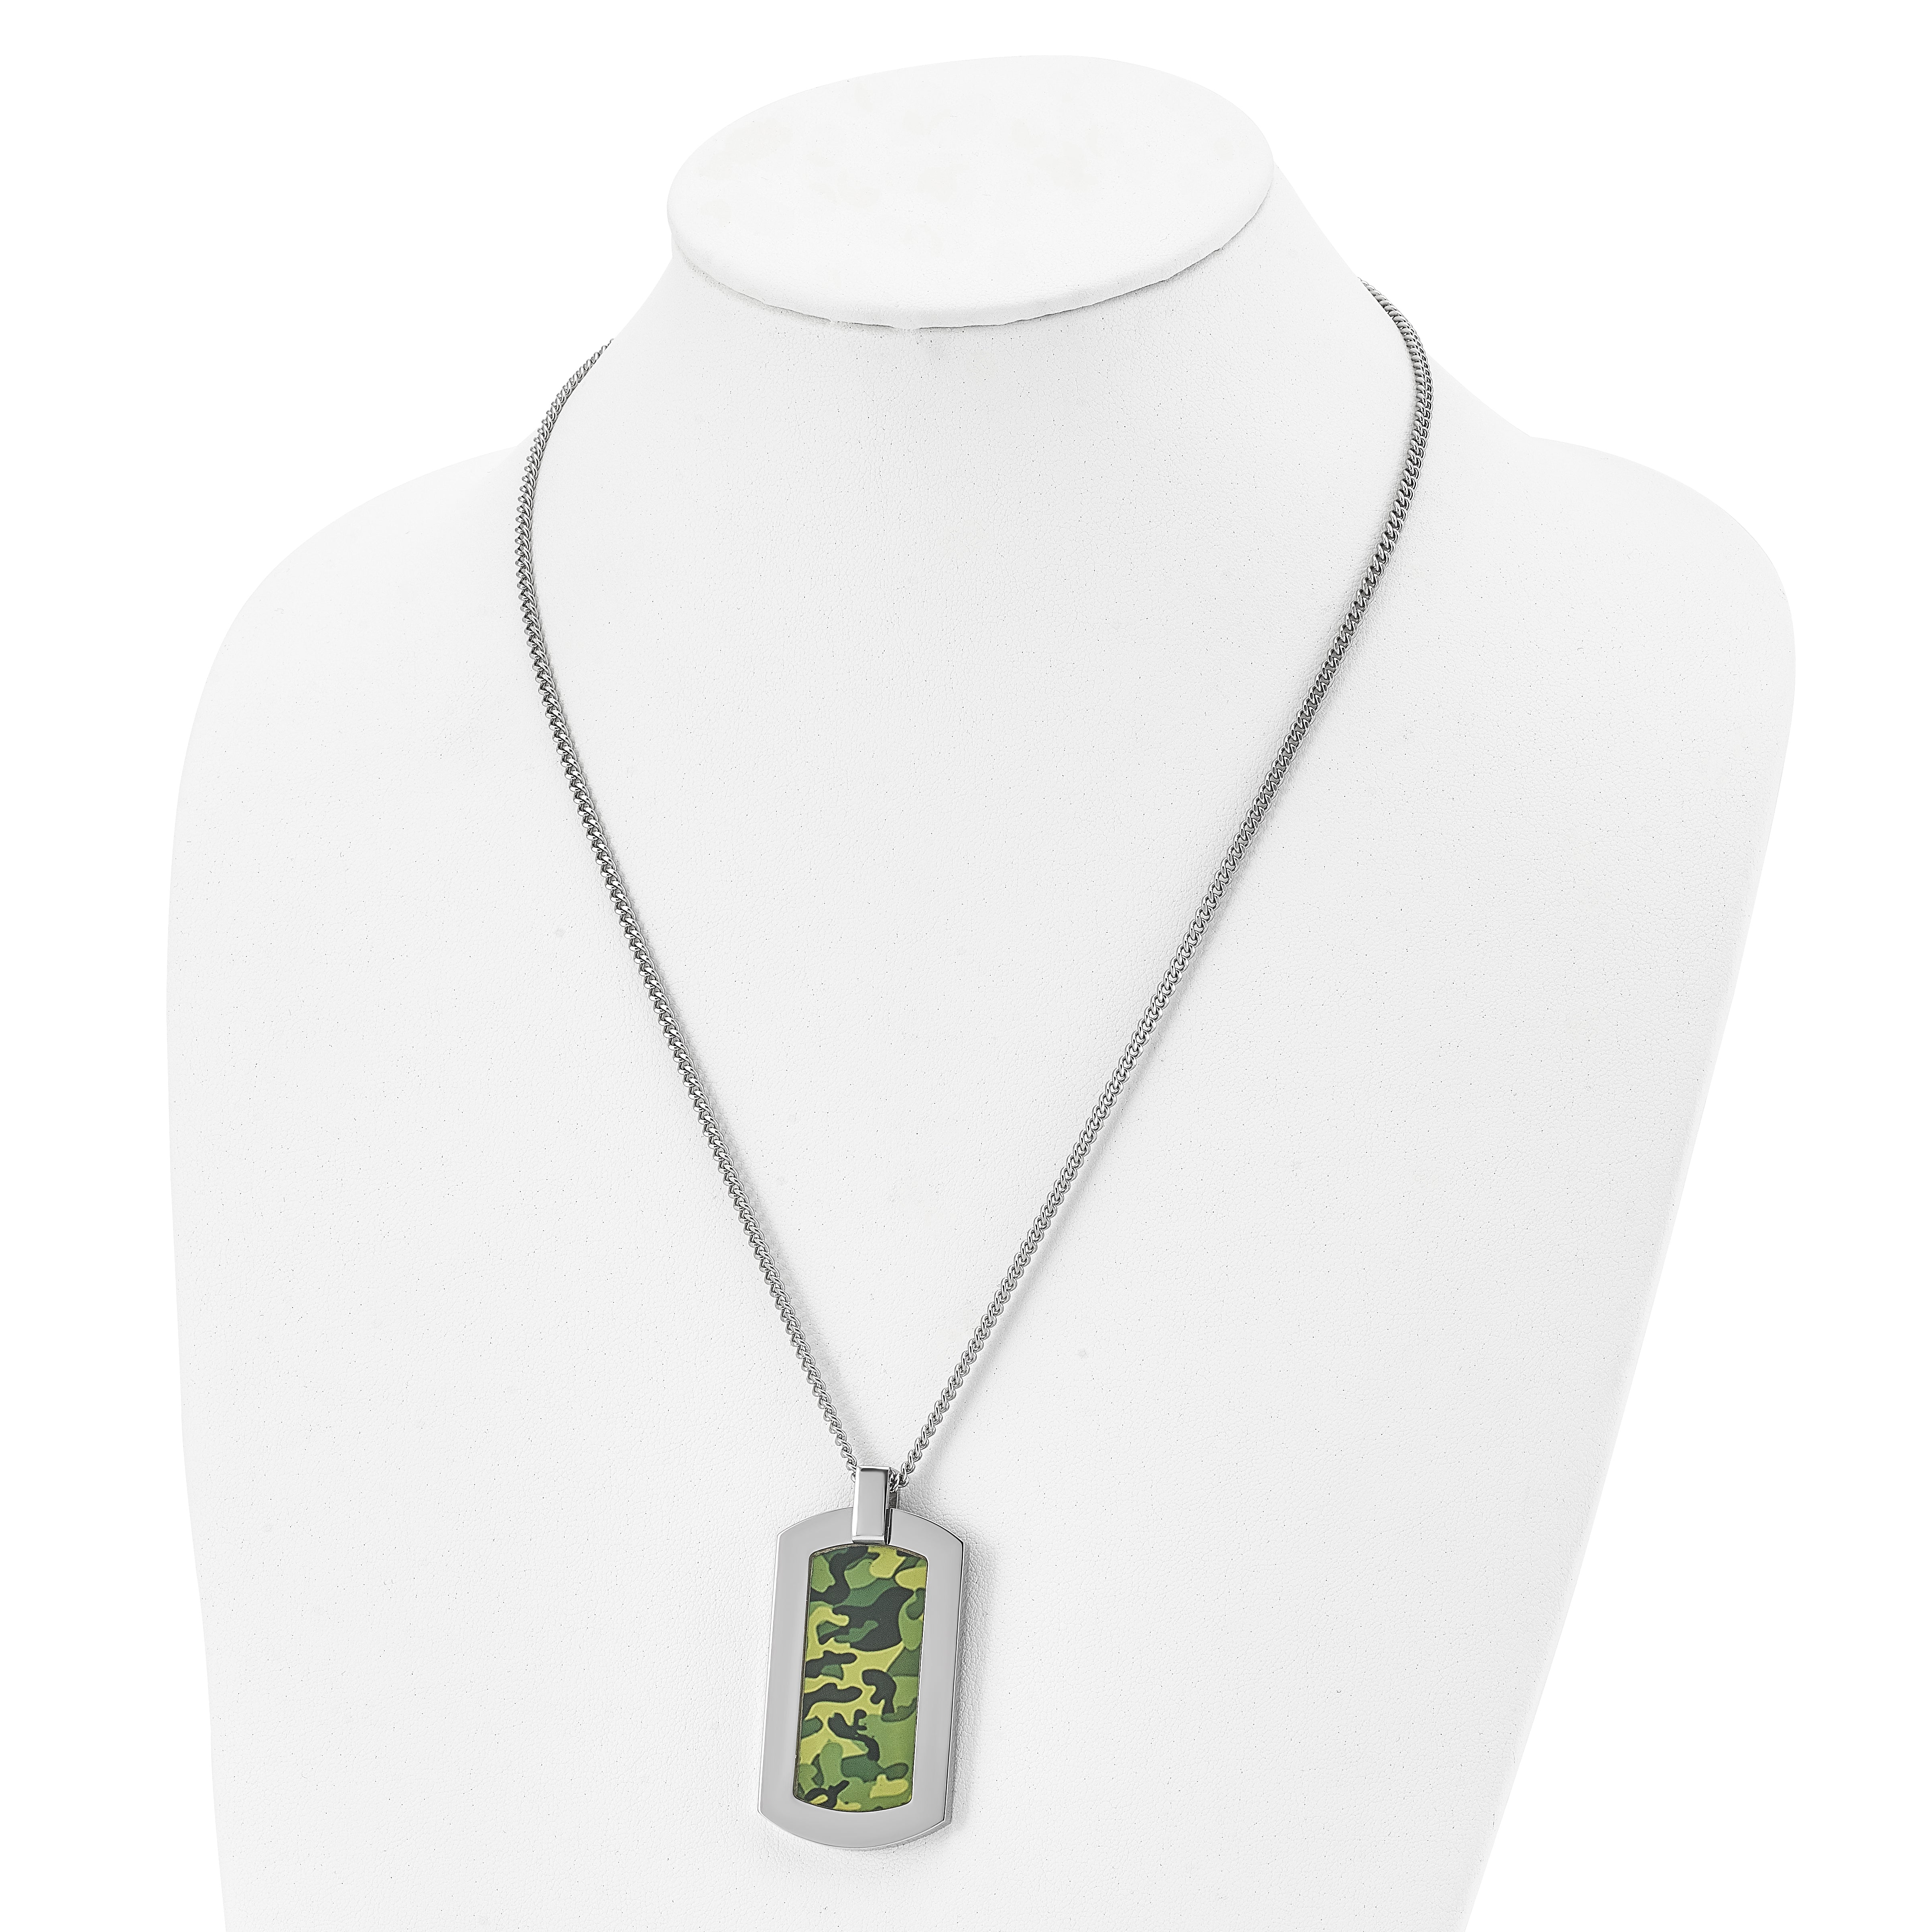 Chisel Stainless Steel Polished Printed Green Camo Under Rubber Dog Tag on a 22 inch Cable Chain Necklace